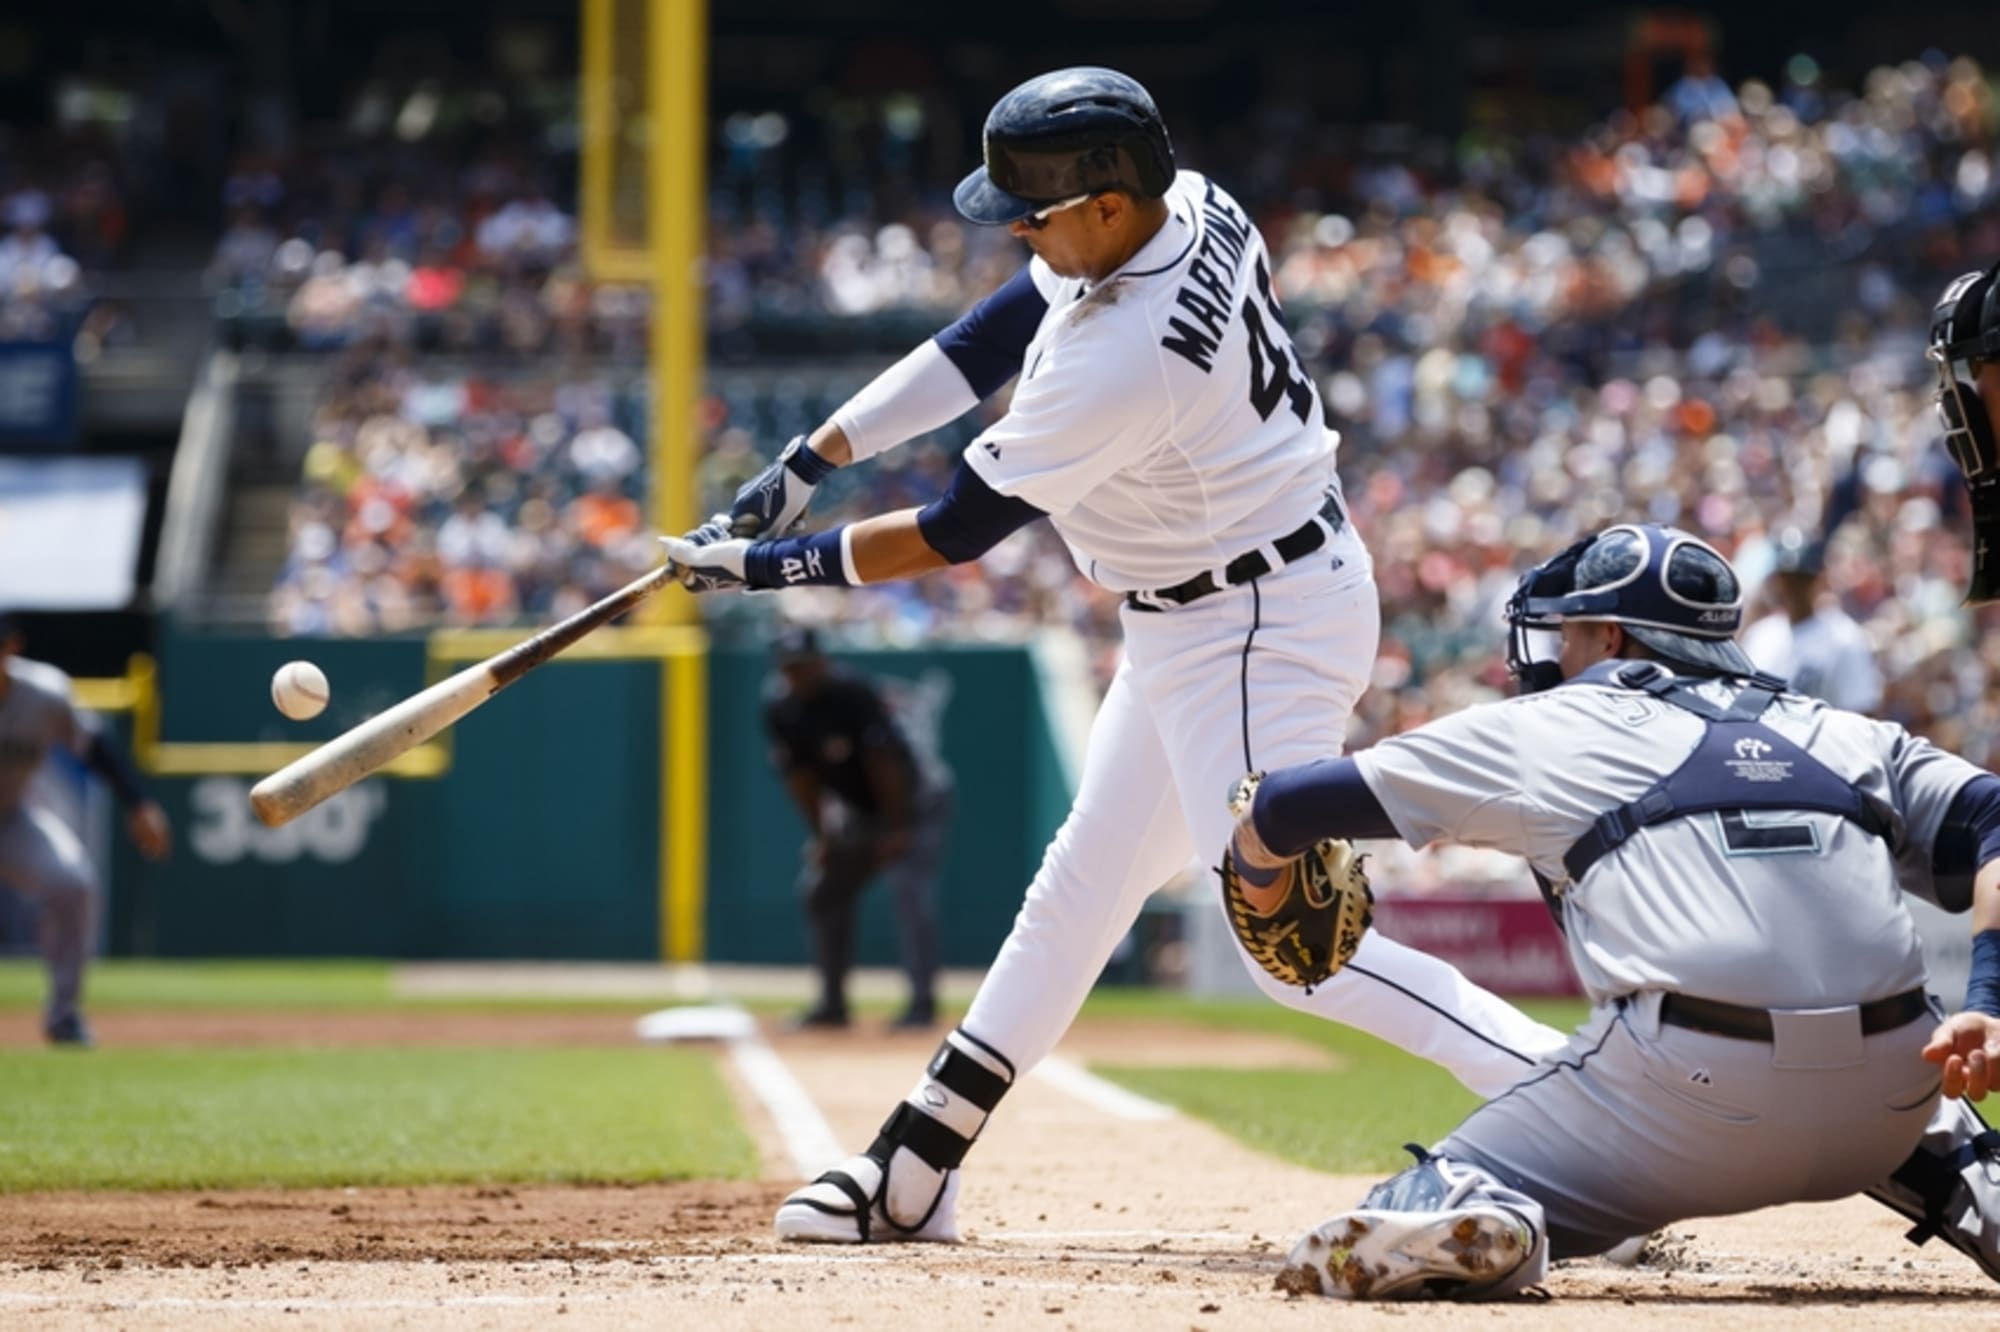 Detroit Tigers vs. Seattle Mariners series photos